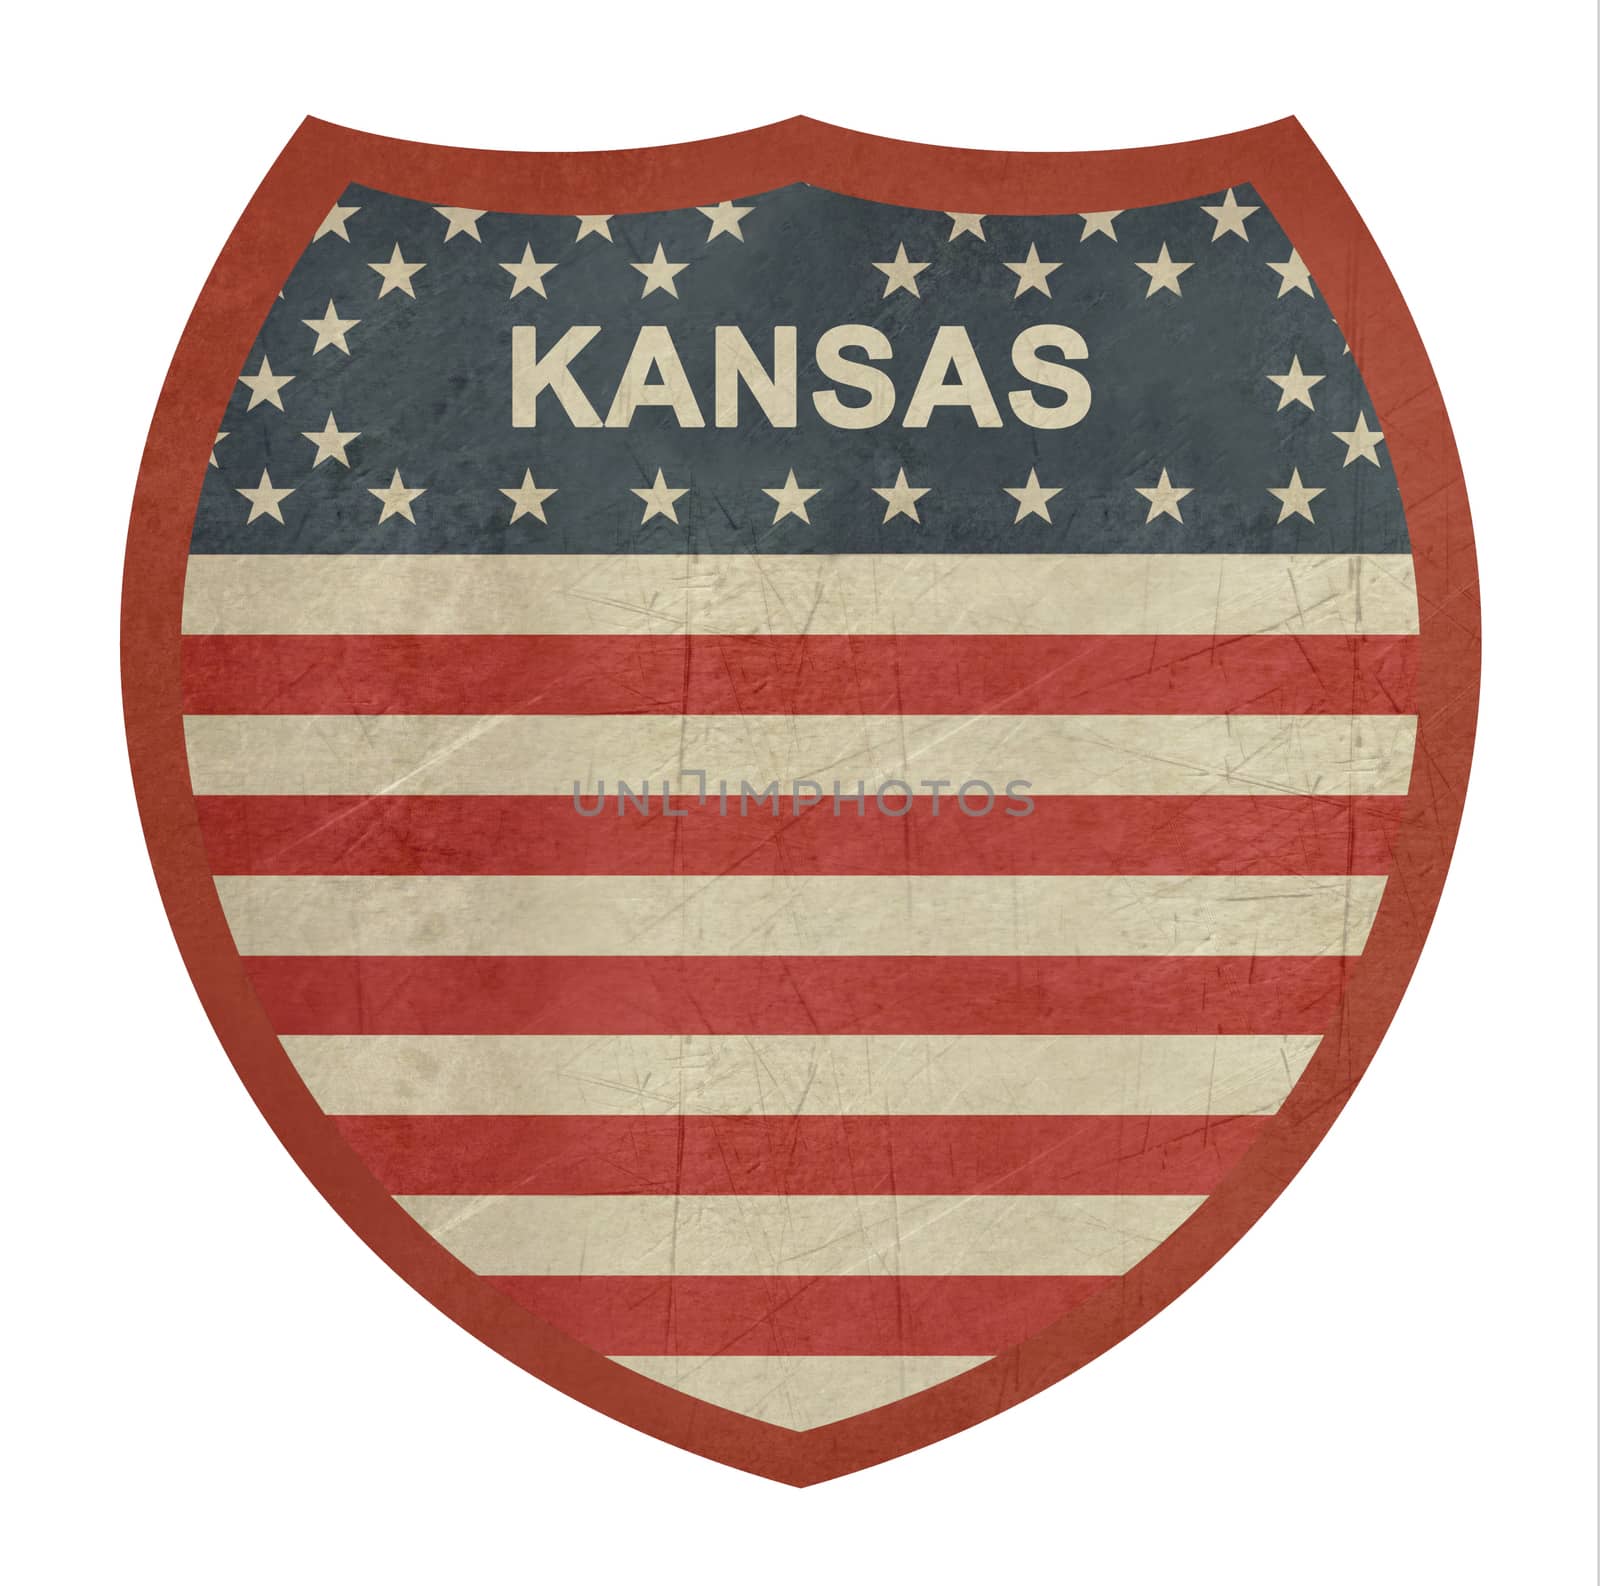 Grunge Kansas American interstate highway sign isolated on a white background.